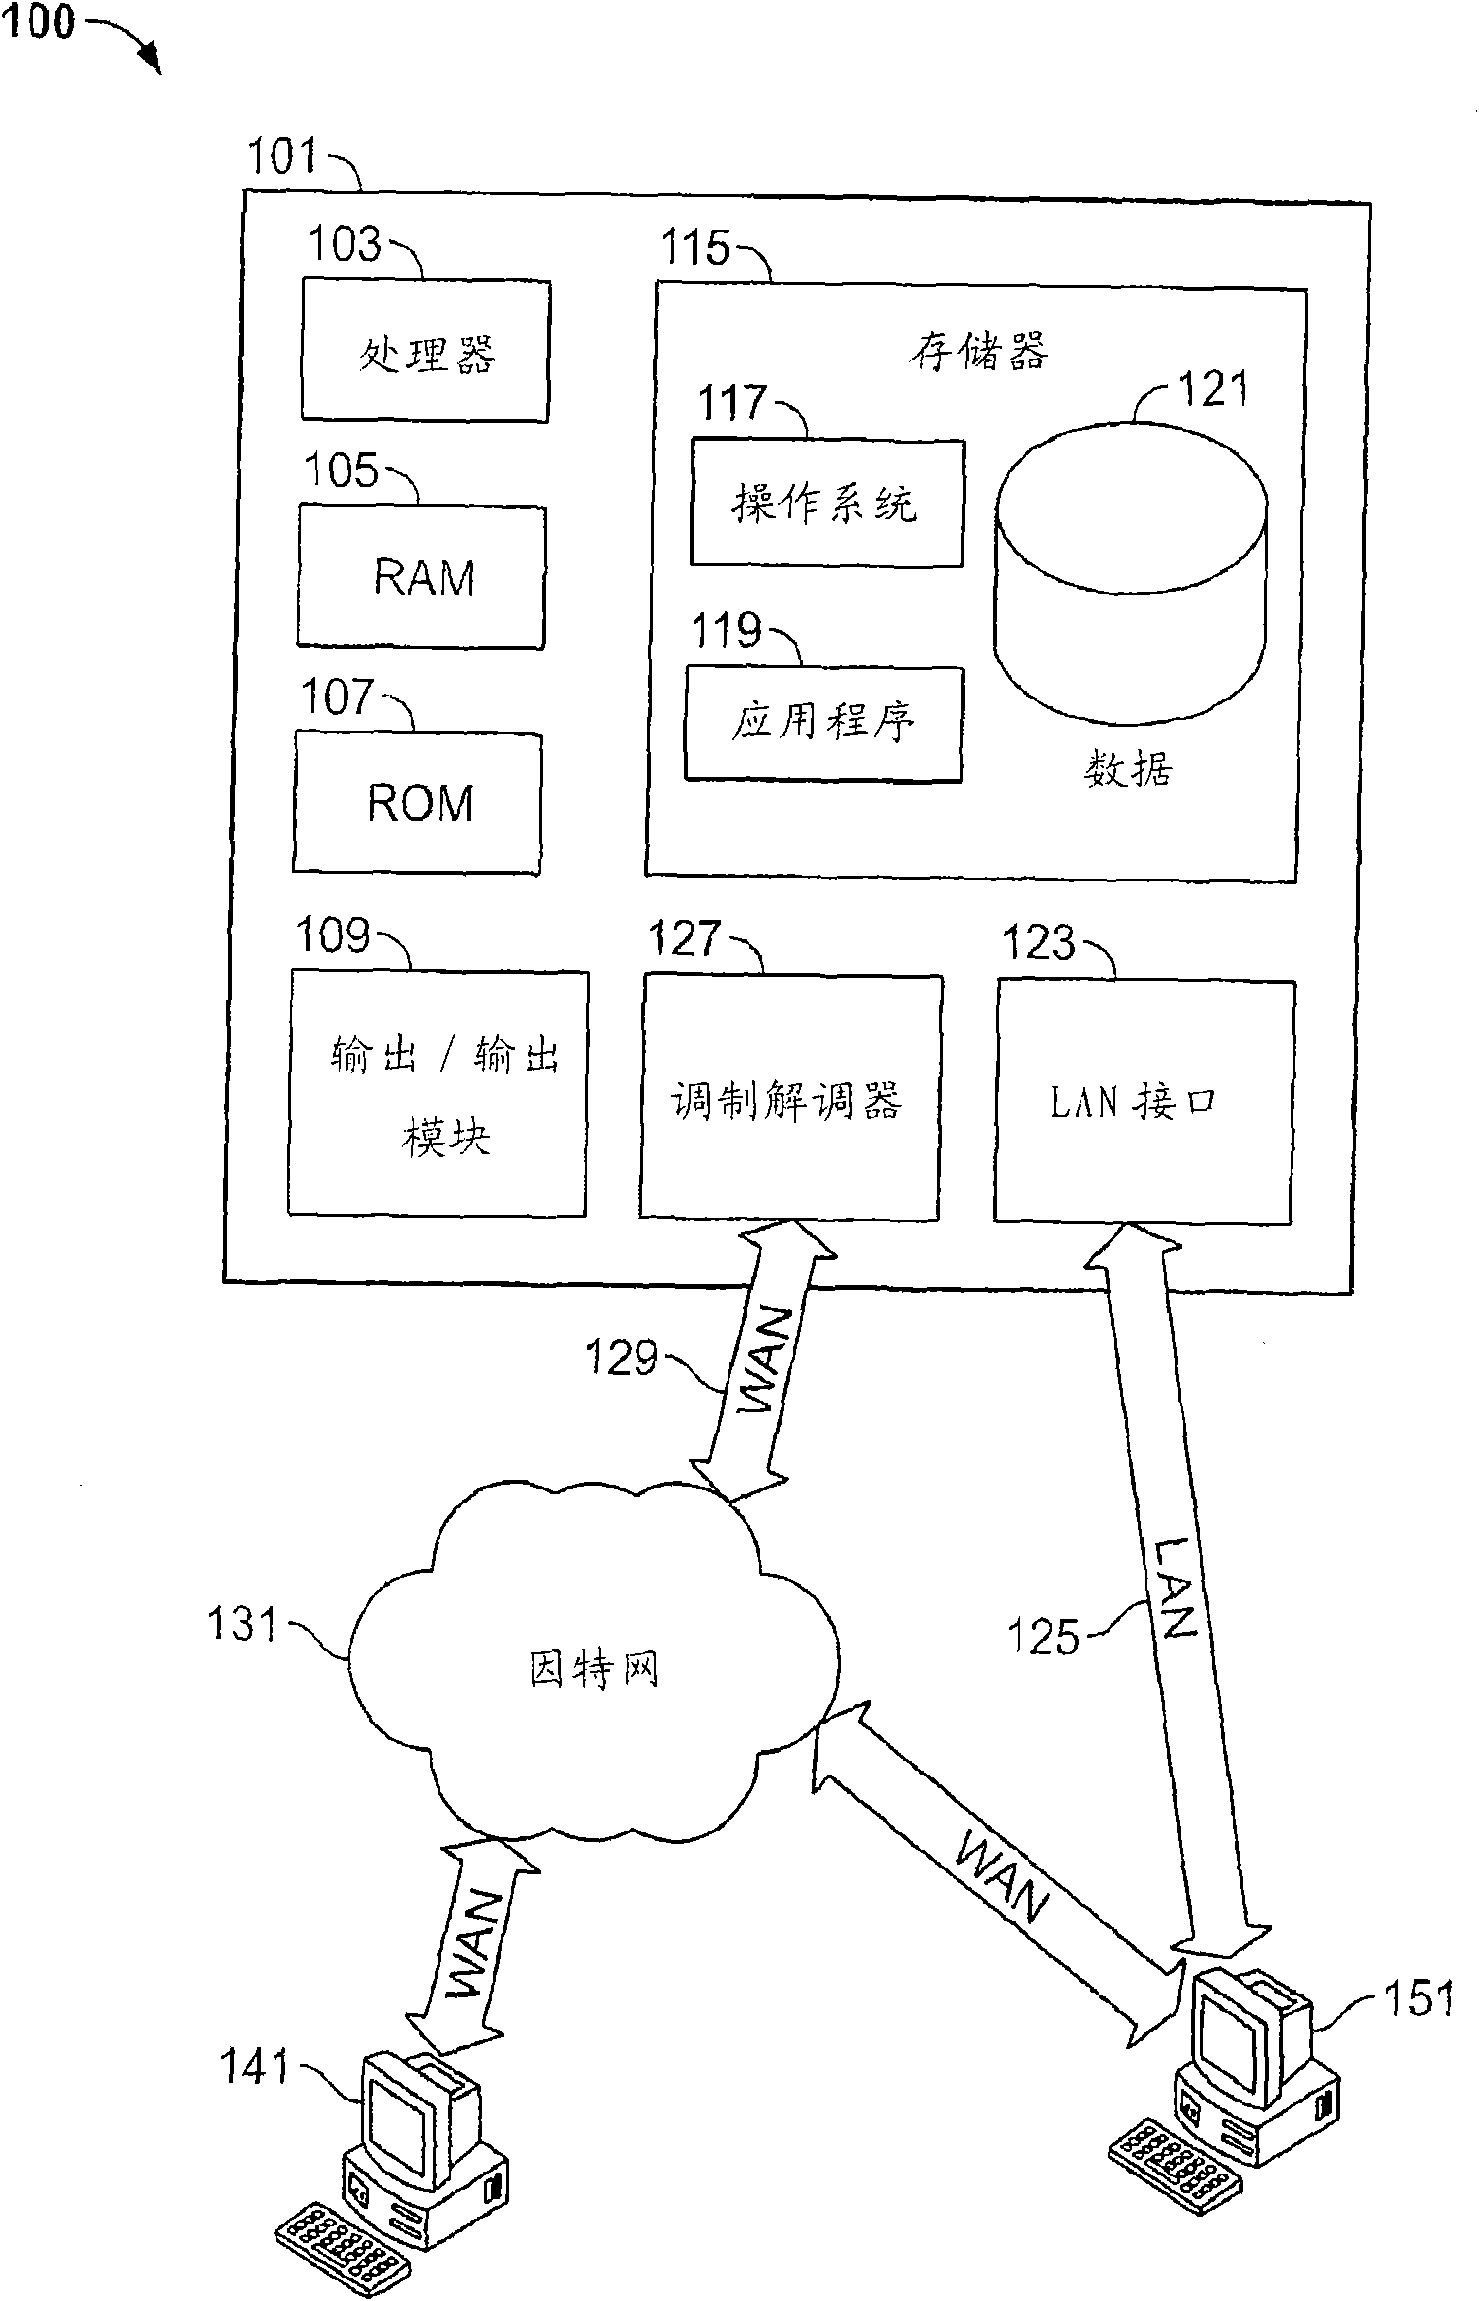 System and method for creating a team sport community